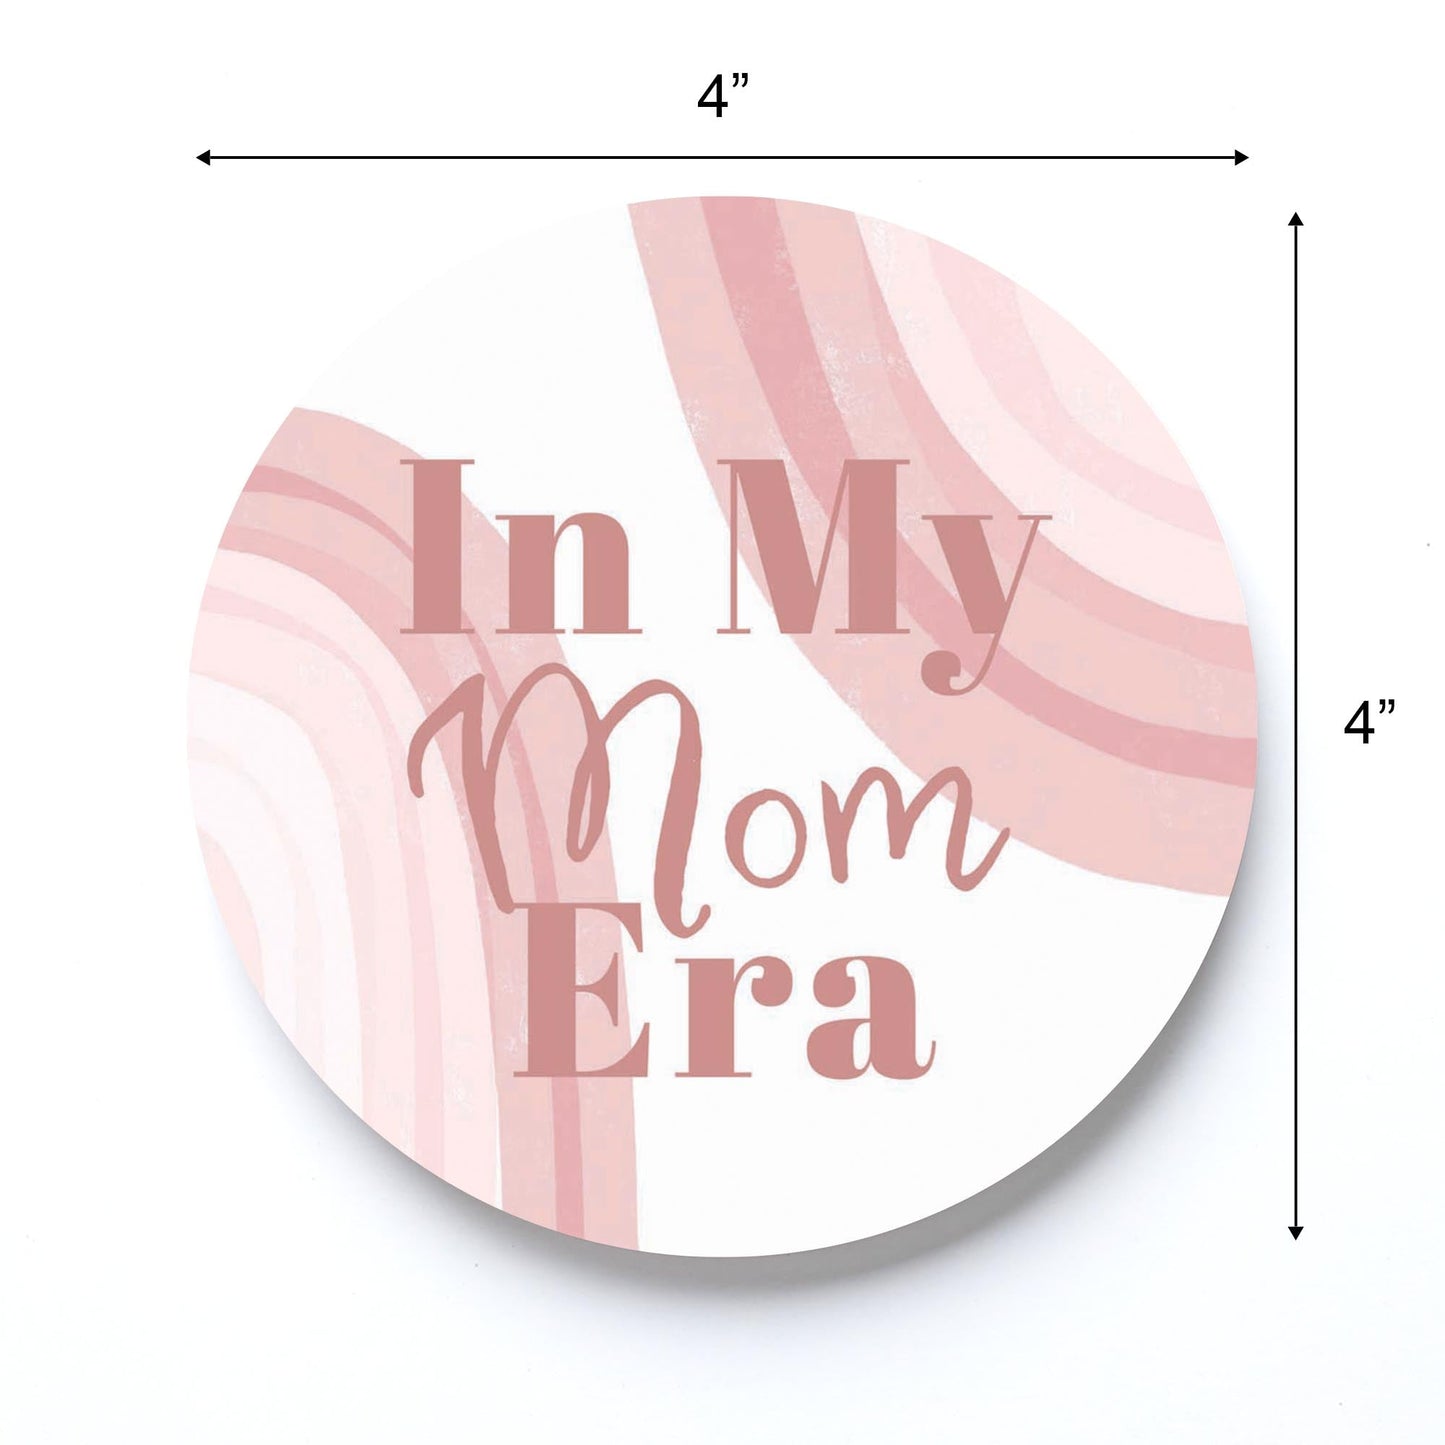 Mother's Day In My Mom Era | 4x4